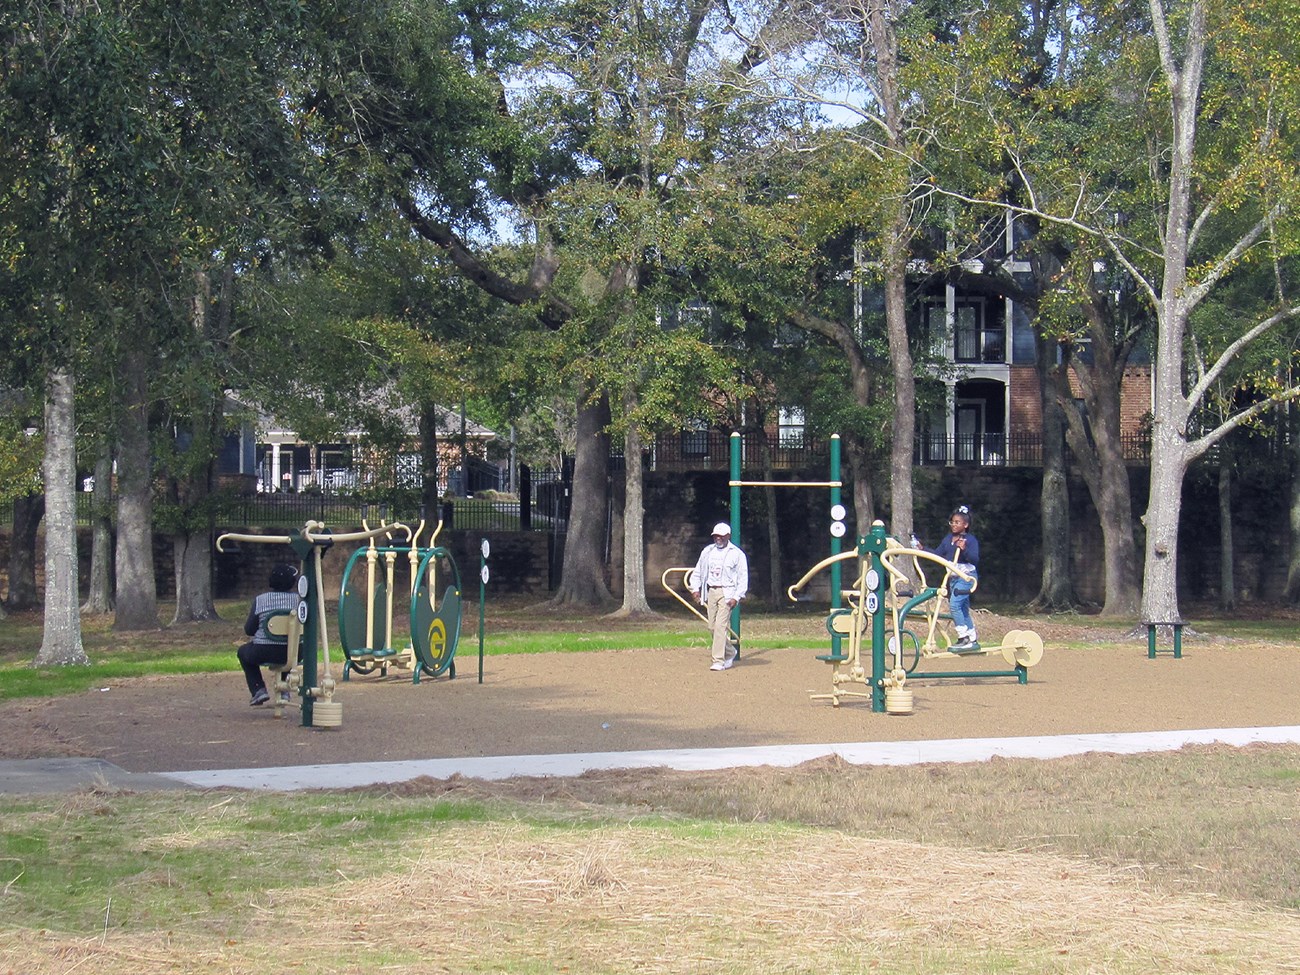 A city park with adults and children.